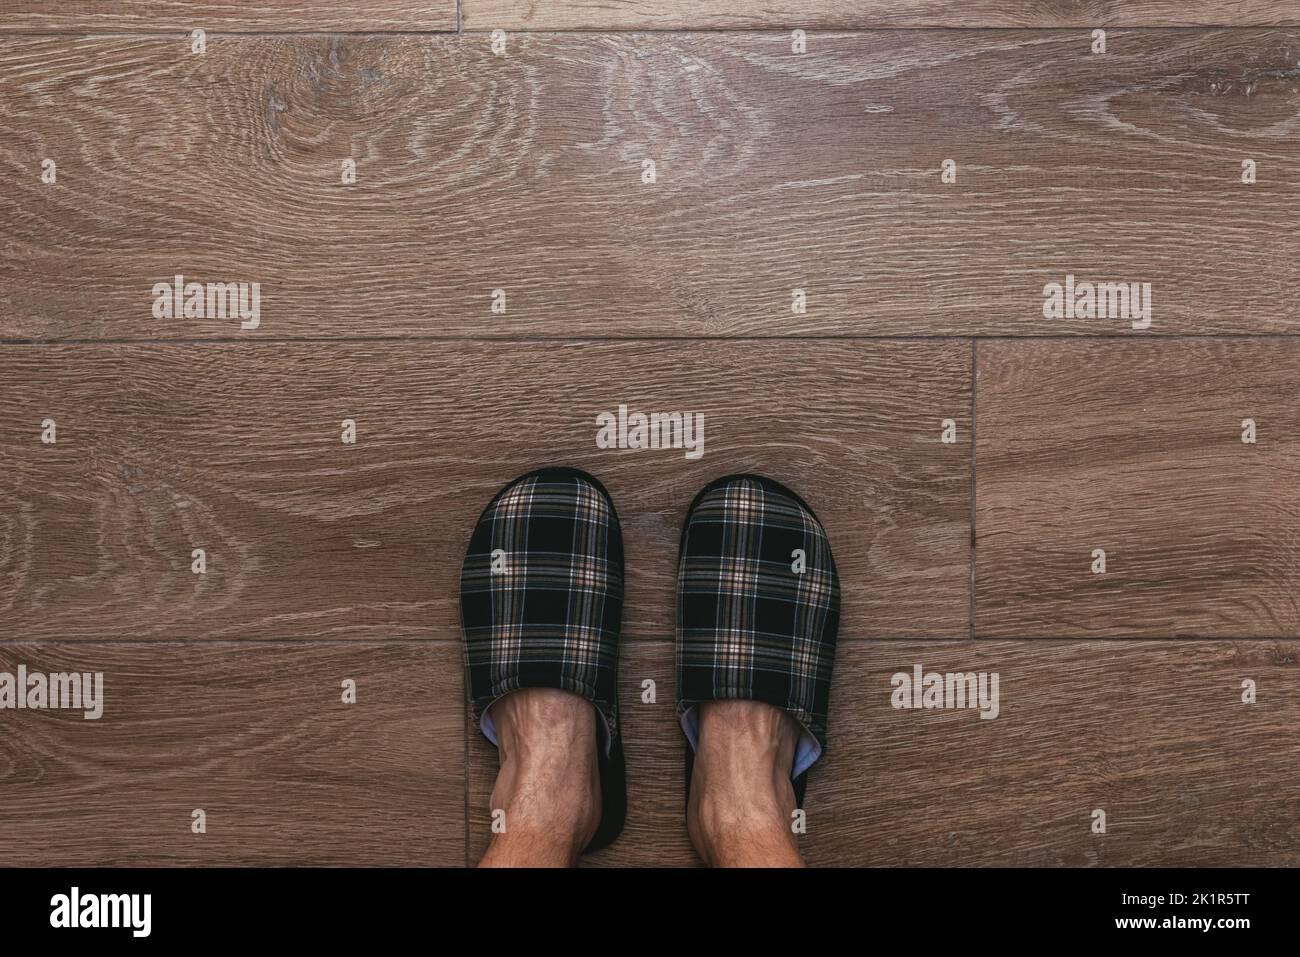 Man wearing home slippers standing on the bathroom floor tiles, top down perspective, copy space included Stock Photo